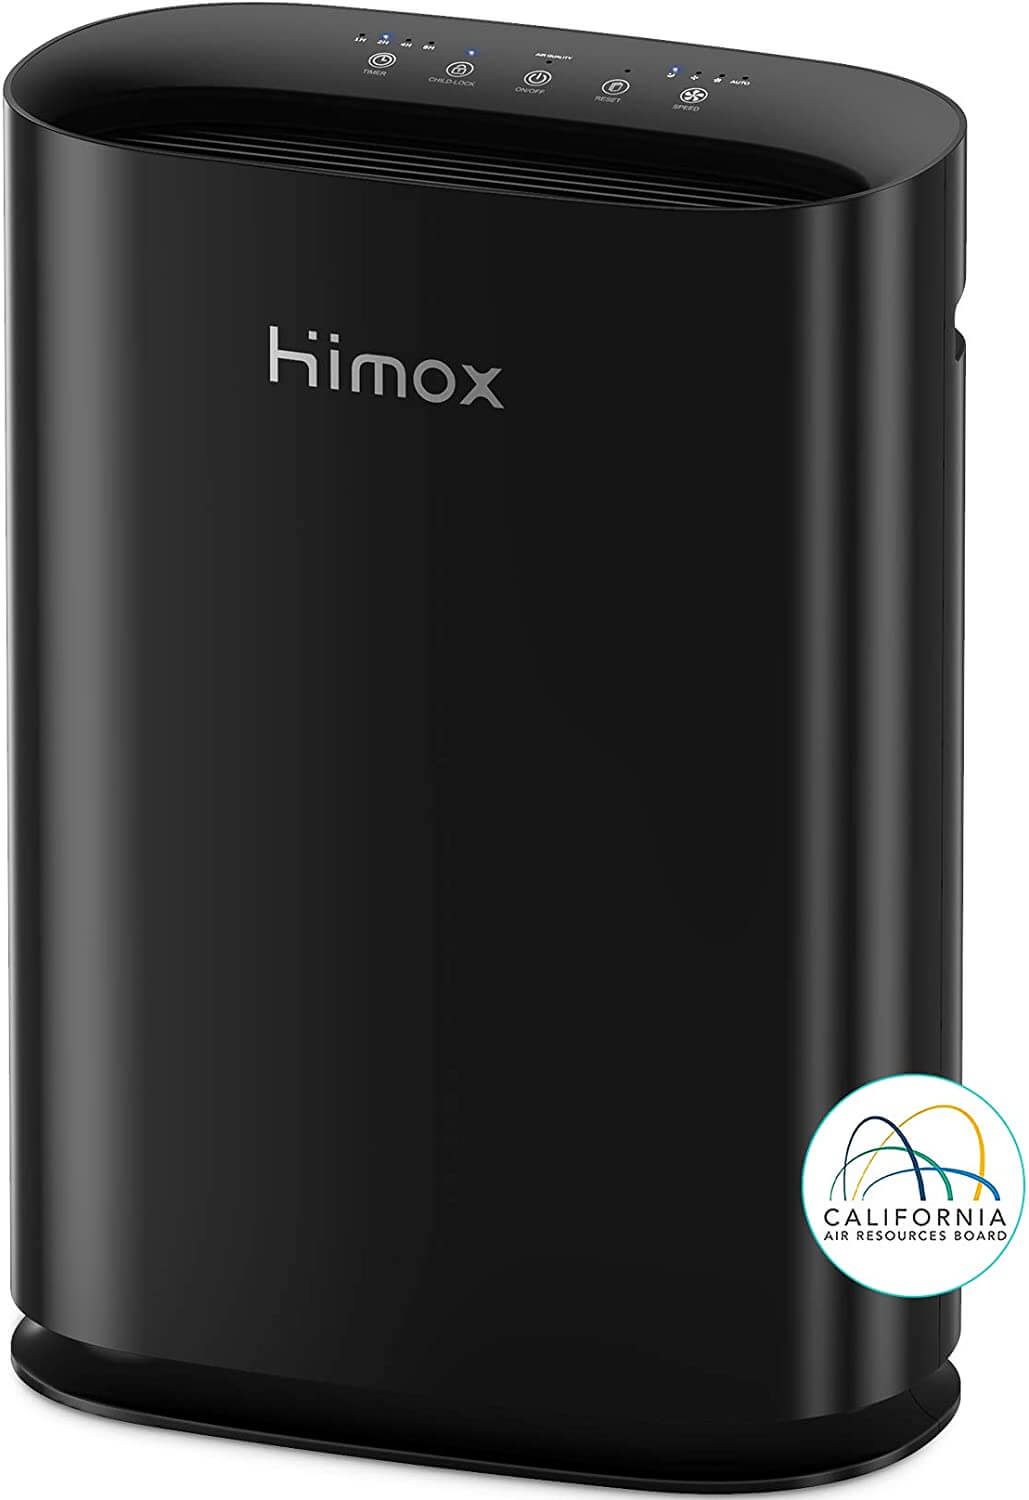 Himox Air Purifiers with HEPA Air Filter